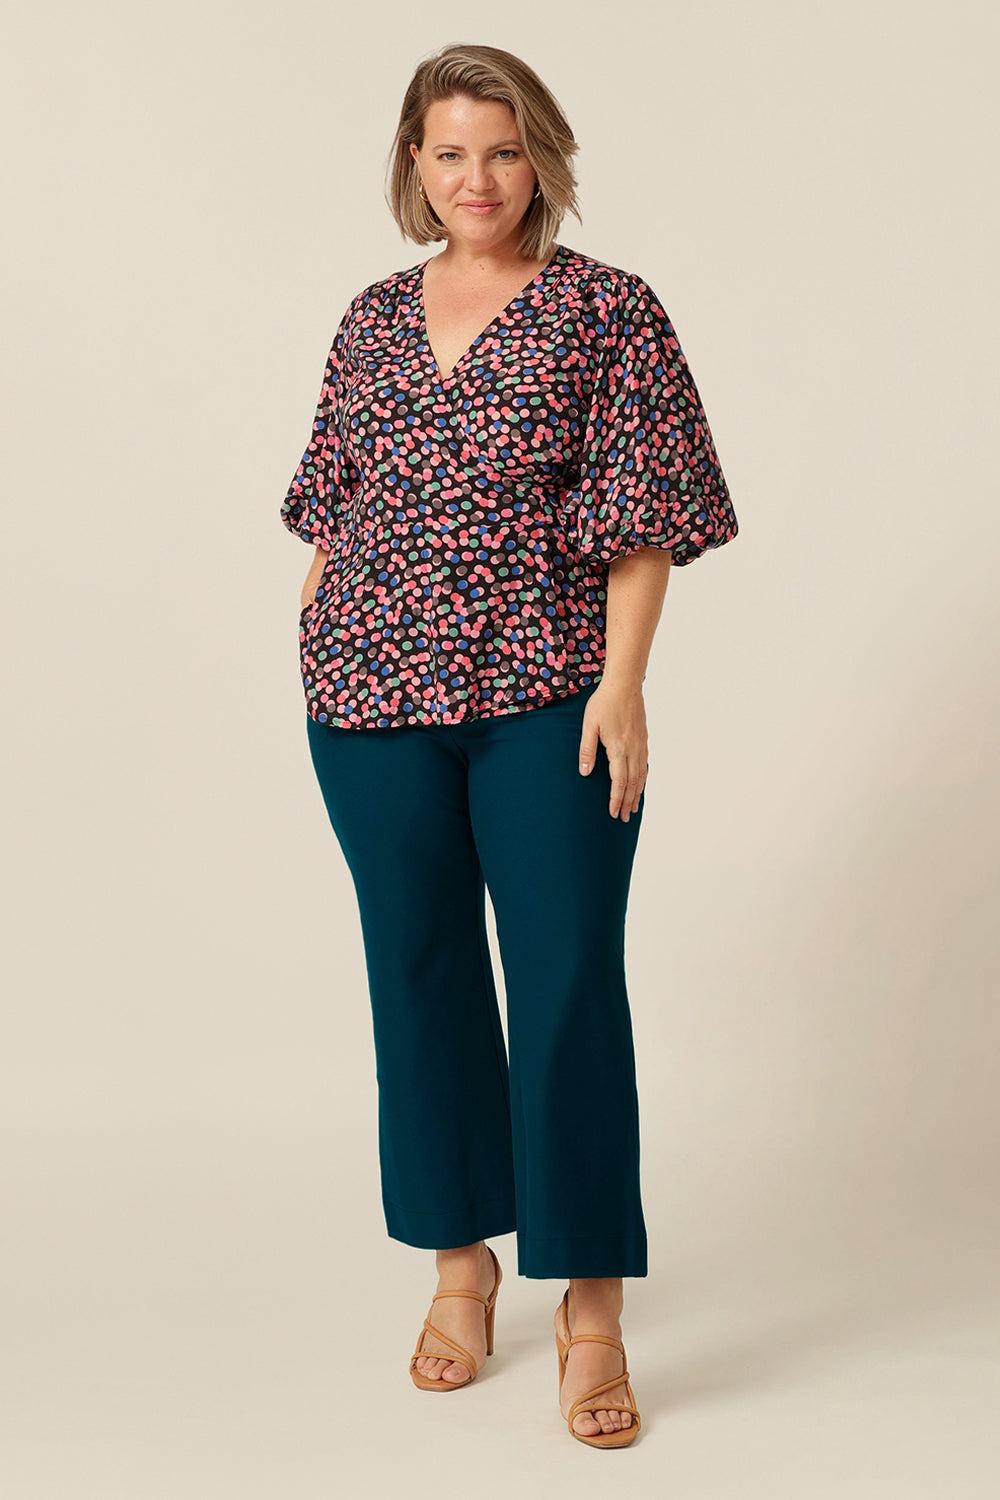 wrap top with 3/4 puff sleeves, made in Australia in eco-conscious fabric for petite to plus size women.